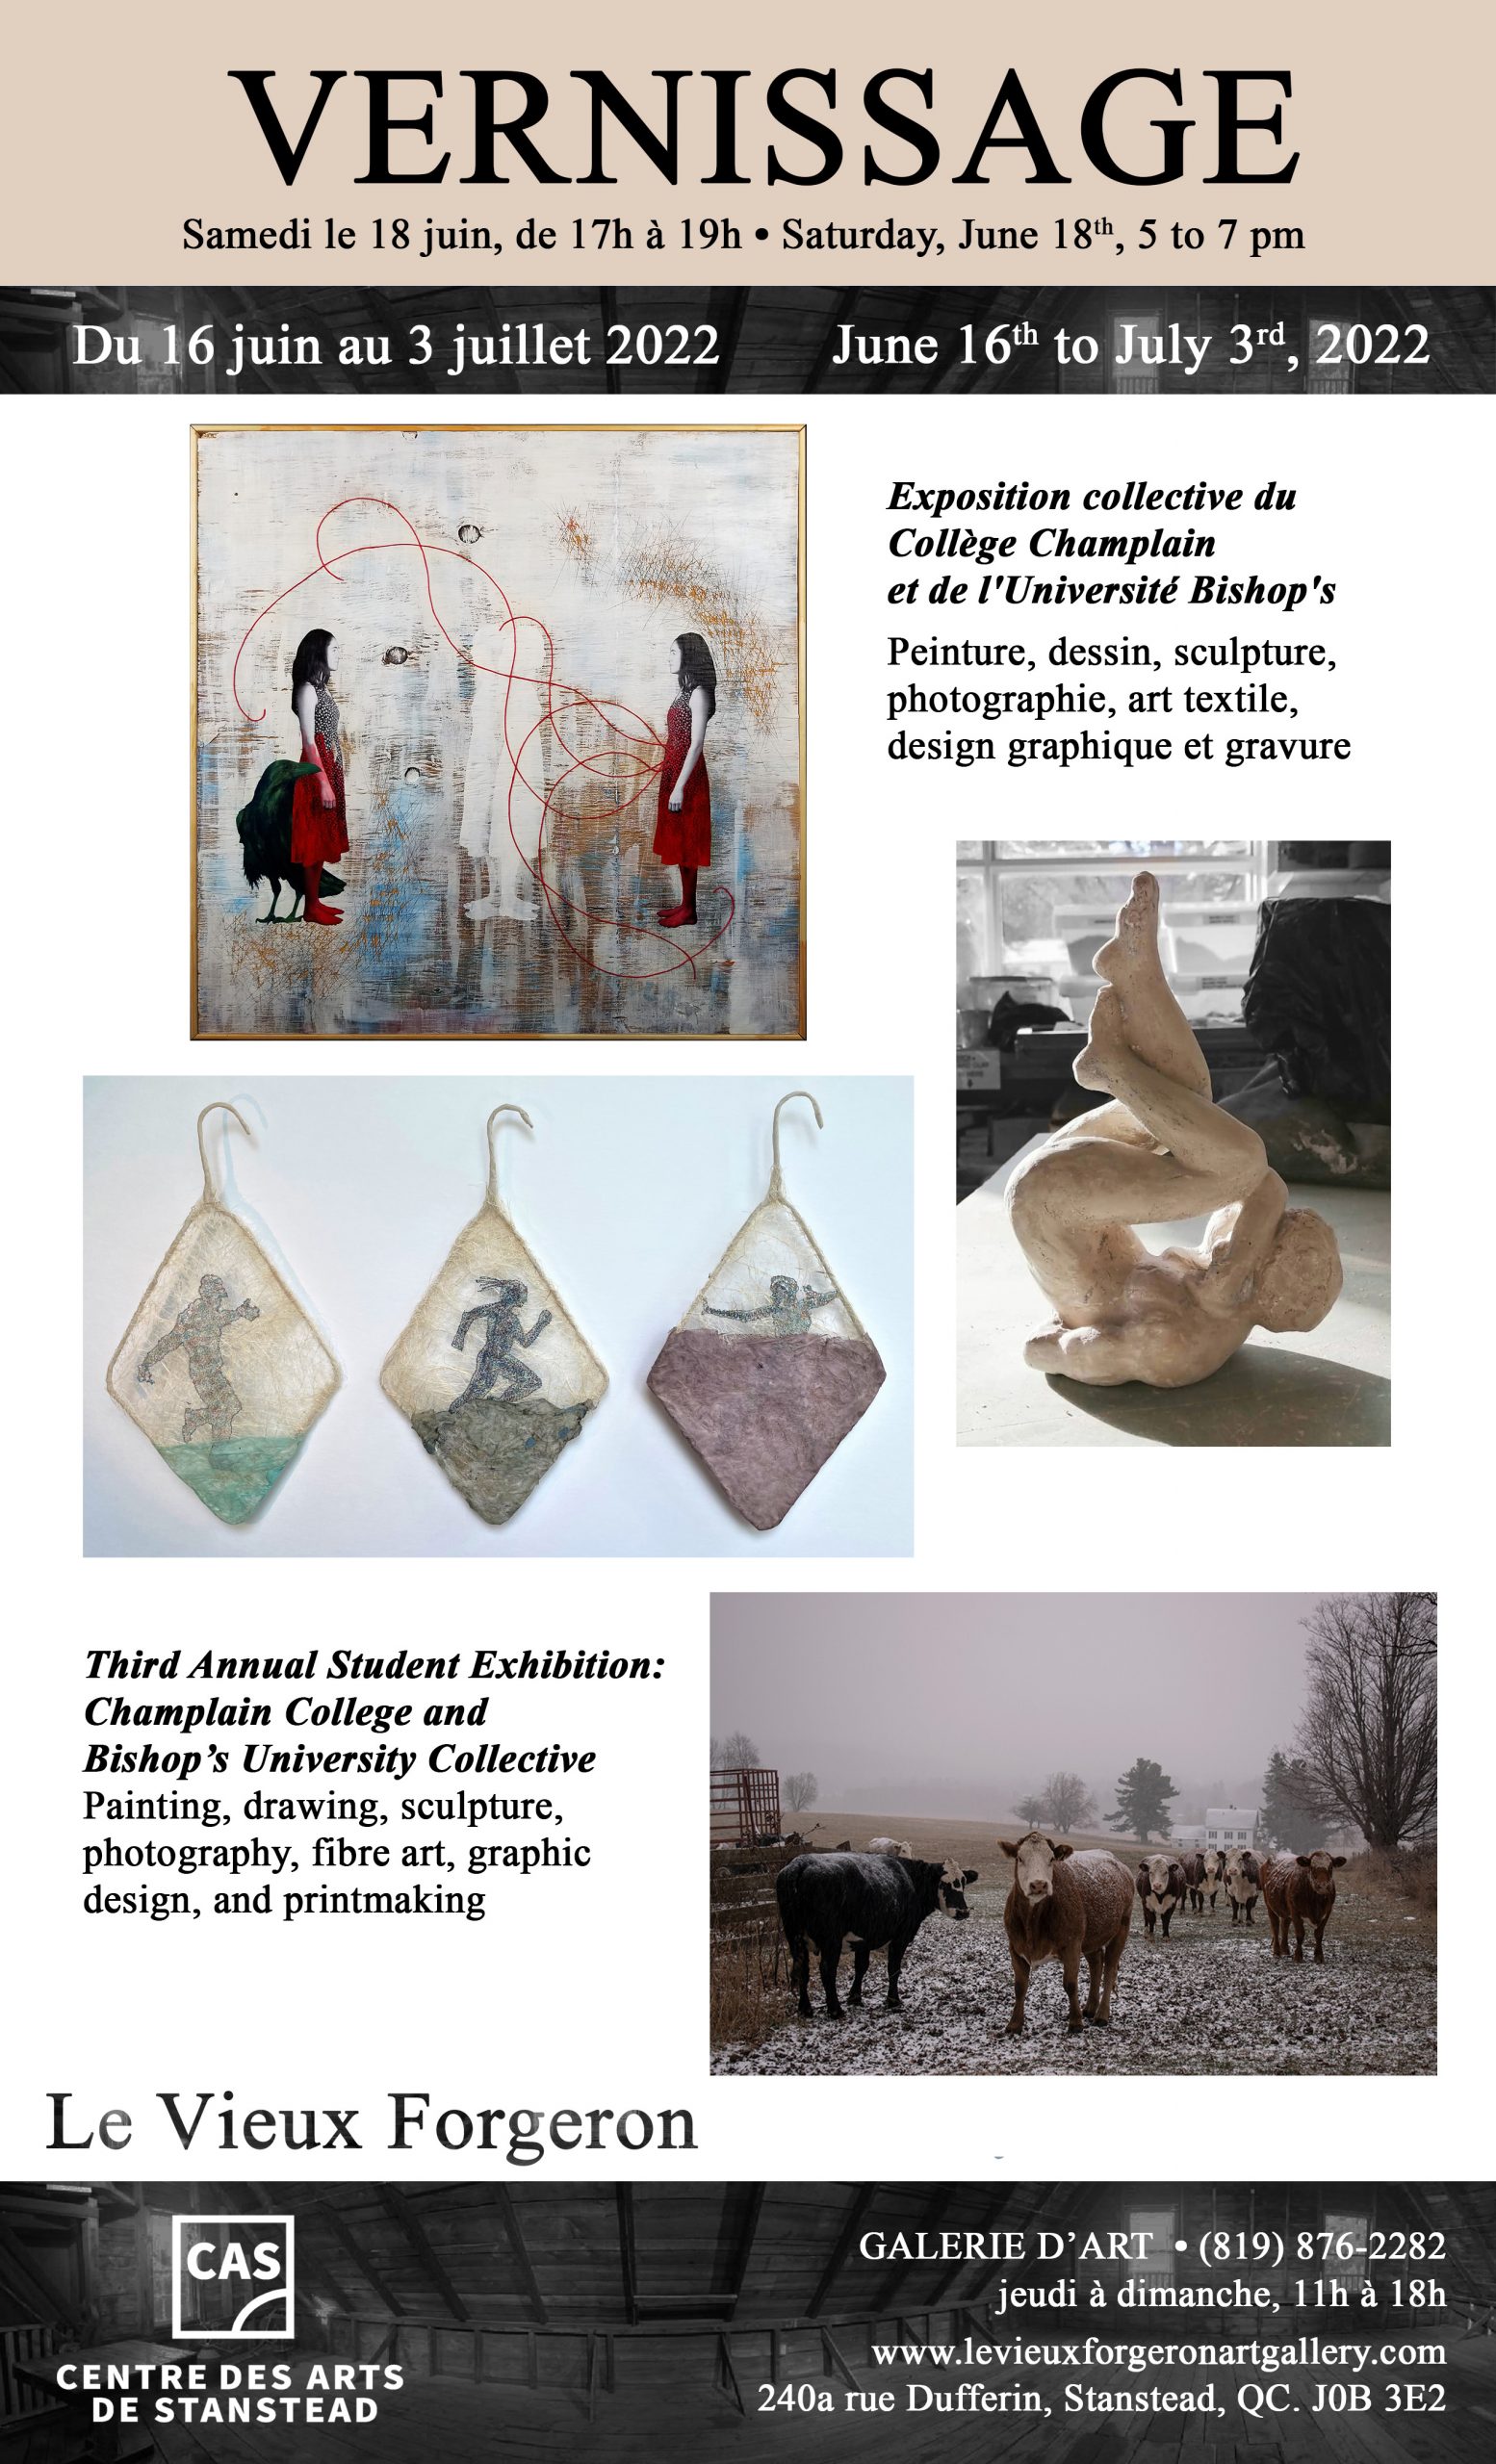 Third annual Student Exhibition – Bishops University and Champlain College Collective